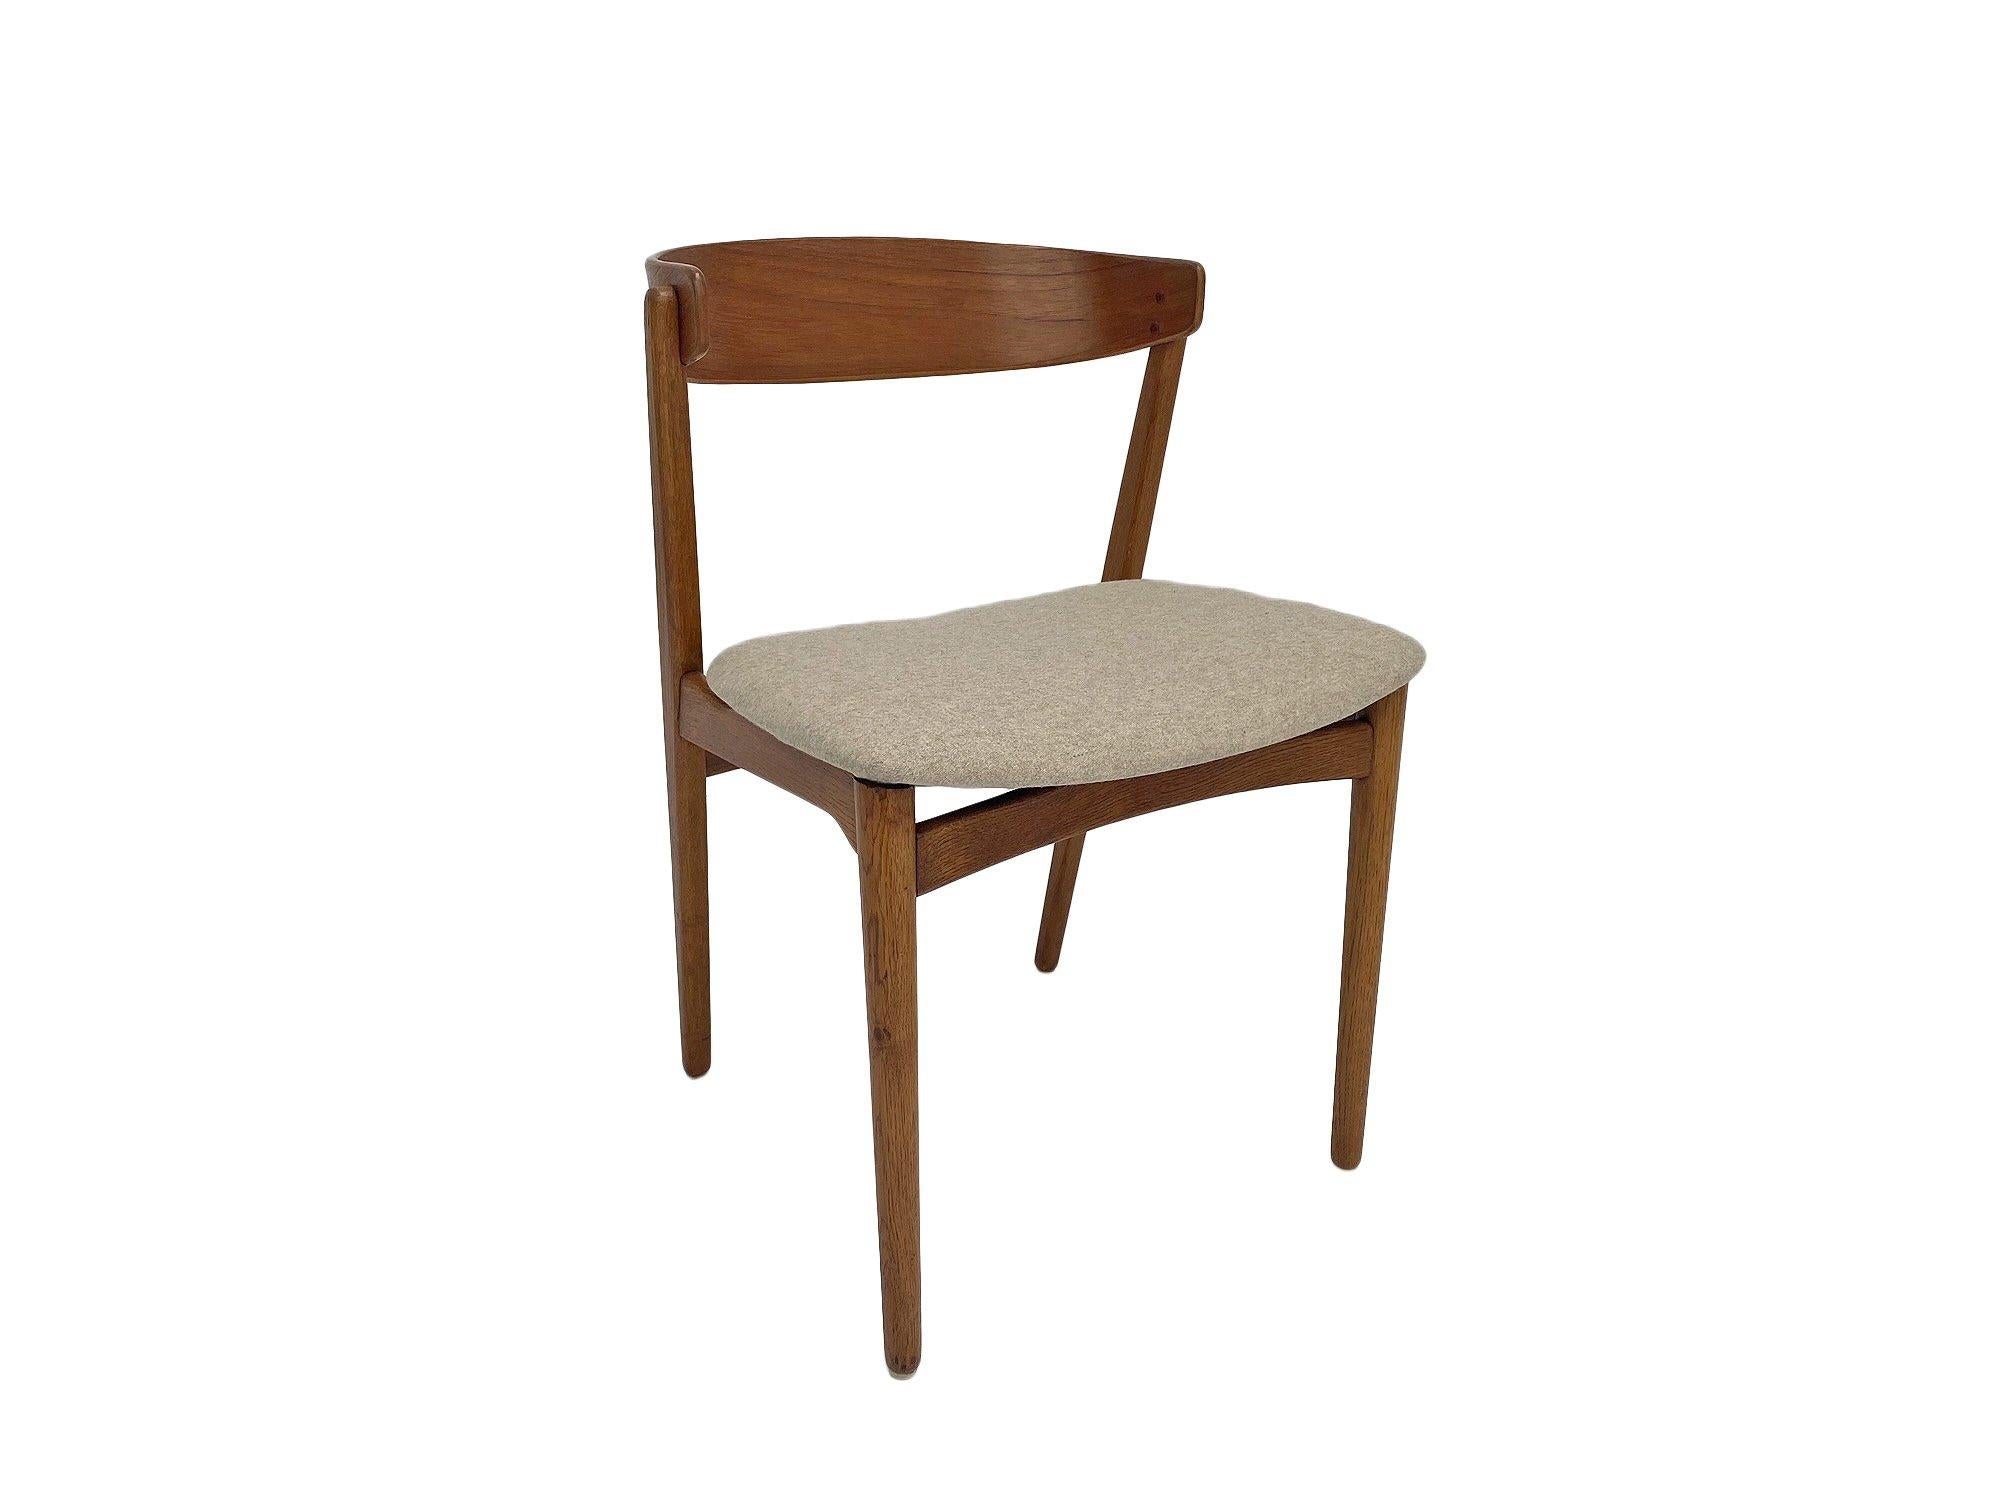 A rare Danish Model 206 oak and teak cream wool desk chair by Farstrup, this would make a stylish addition to any living or work area.

The chair has a wide seat and sculptured backrest for enhanced comfort. A striking piece of classic